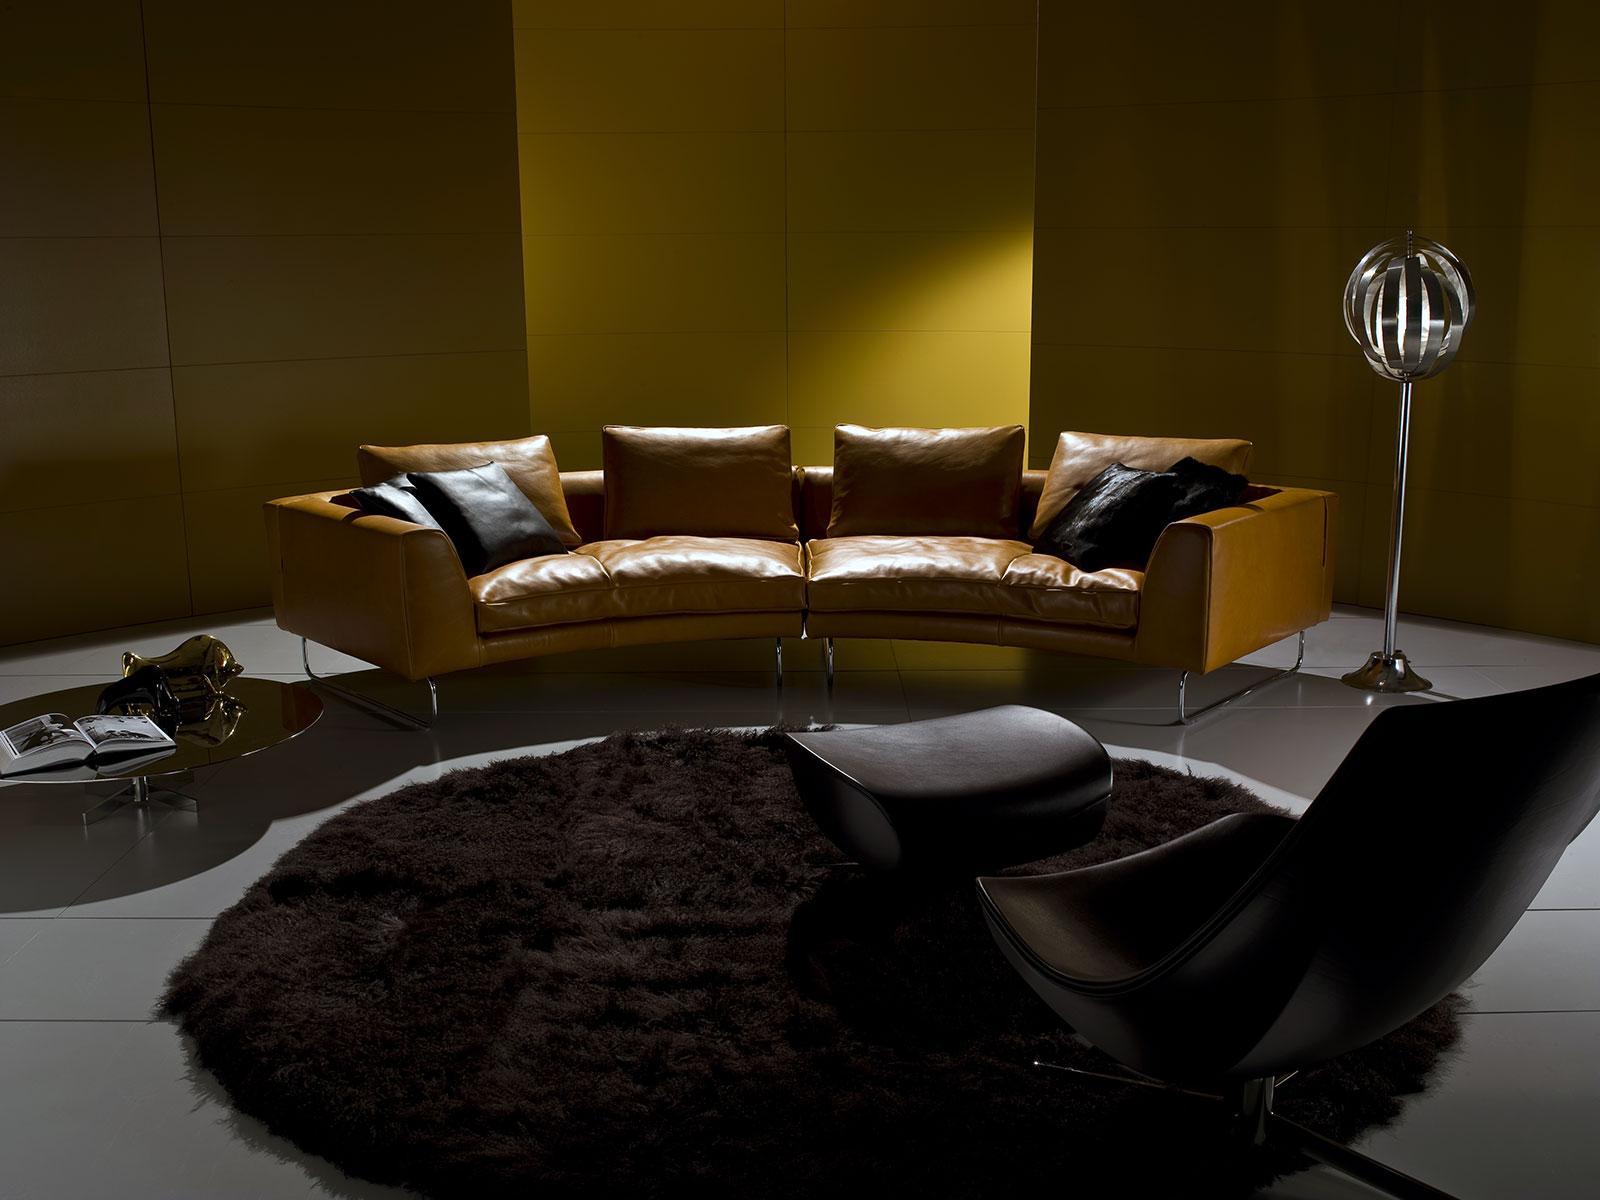 Add-Look Round is a luxury leather sofa. As a perfect fusion of artisanship and modern aesthetics, this round leather sofa combines with every contemporary decor.